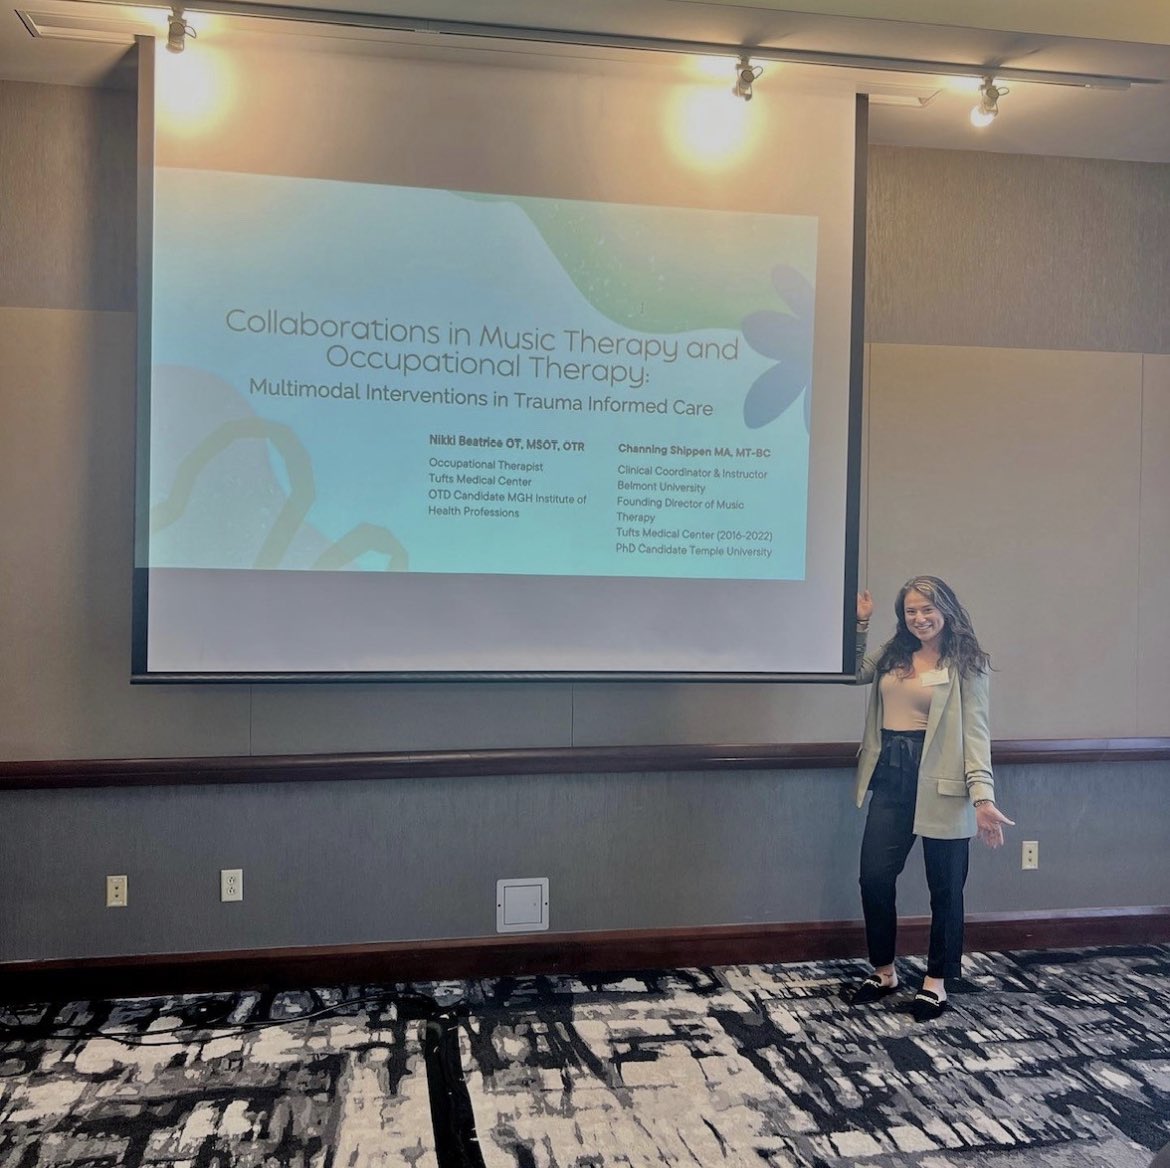 @NikkiBeatrice1 Psych OT @TuftsMedicalCtr and @ChanningShippen Instructor of Music Therapy @BelmontUniv presented Collaborations in Music Therapy and Occupational Therapy: Multimodal Interventions in Trauma Informed Care at #SERAMTA conference! @AmtaResearch #MentalHealthCrisis